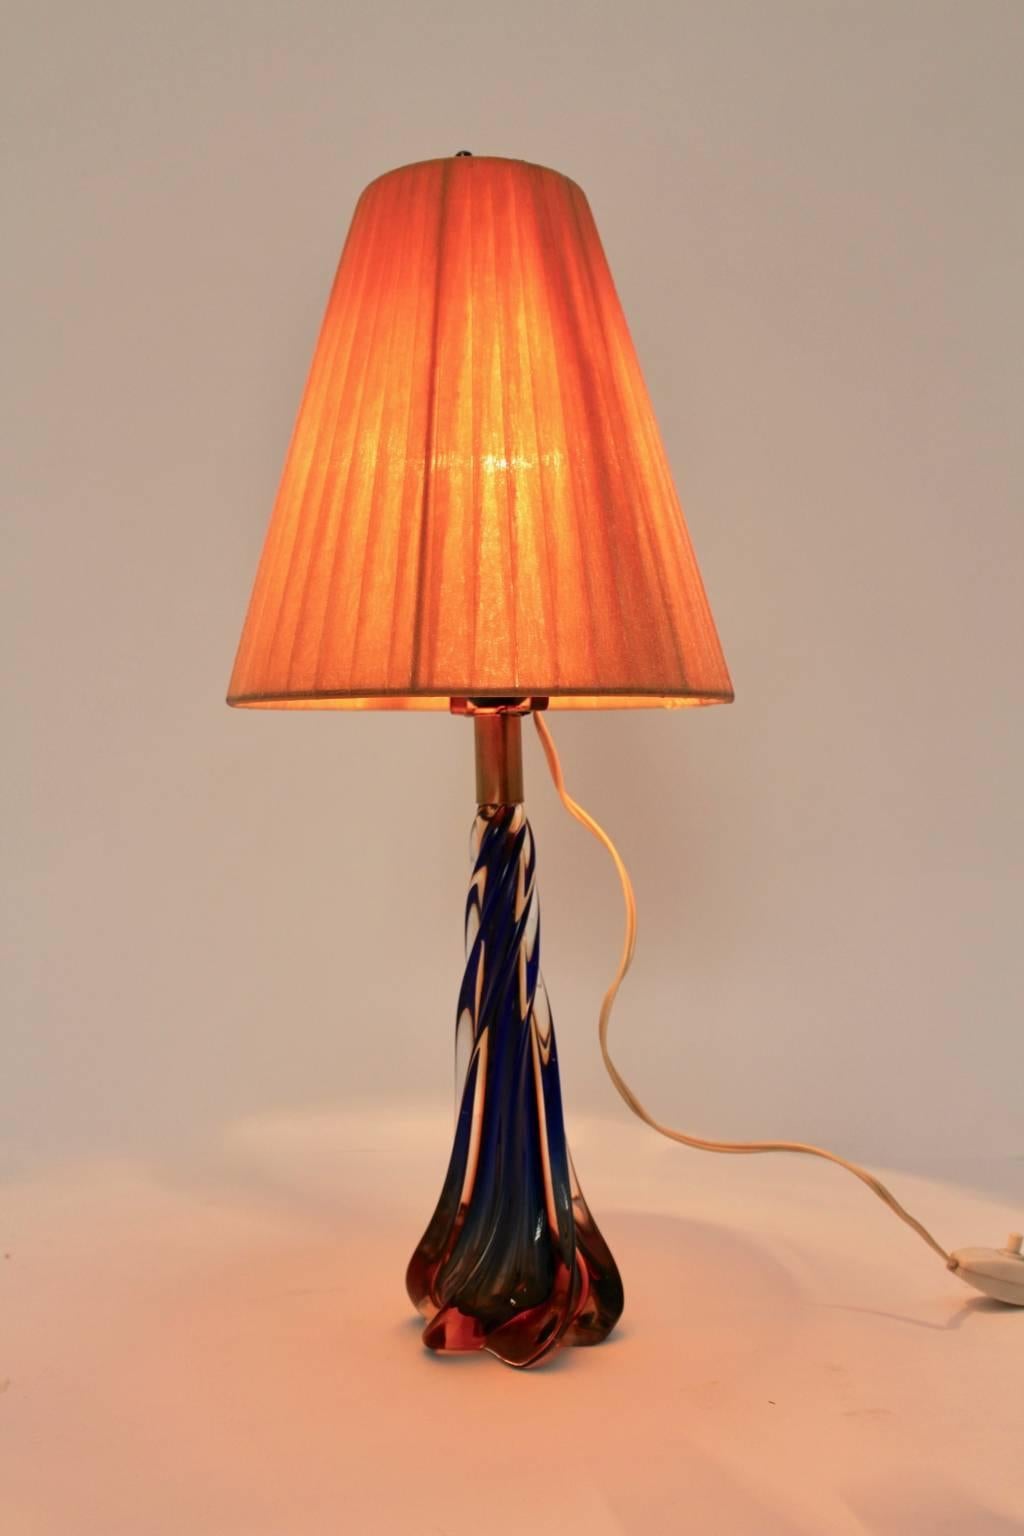 Italian Mid-Century Modern Vintage Blue and Orange Murano Glass Table Lamp, 1950s, Italy For Sale